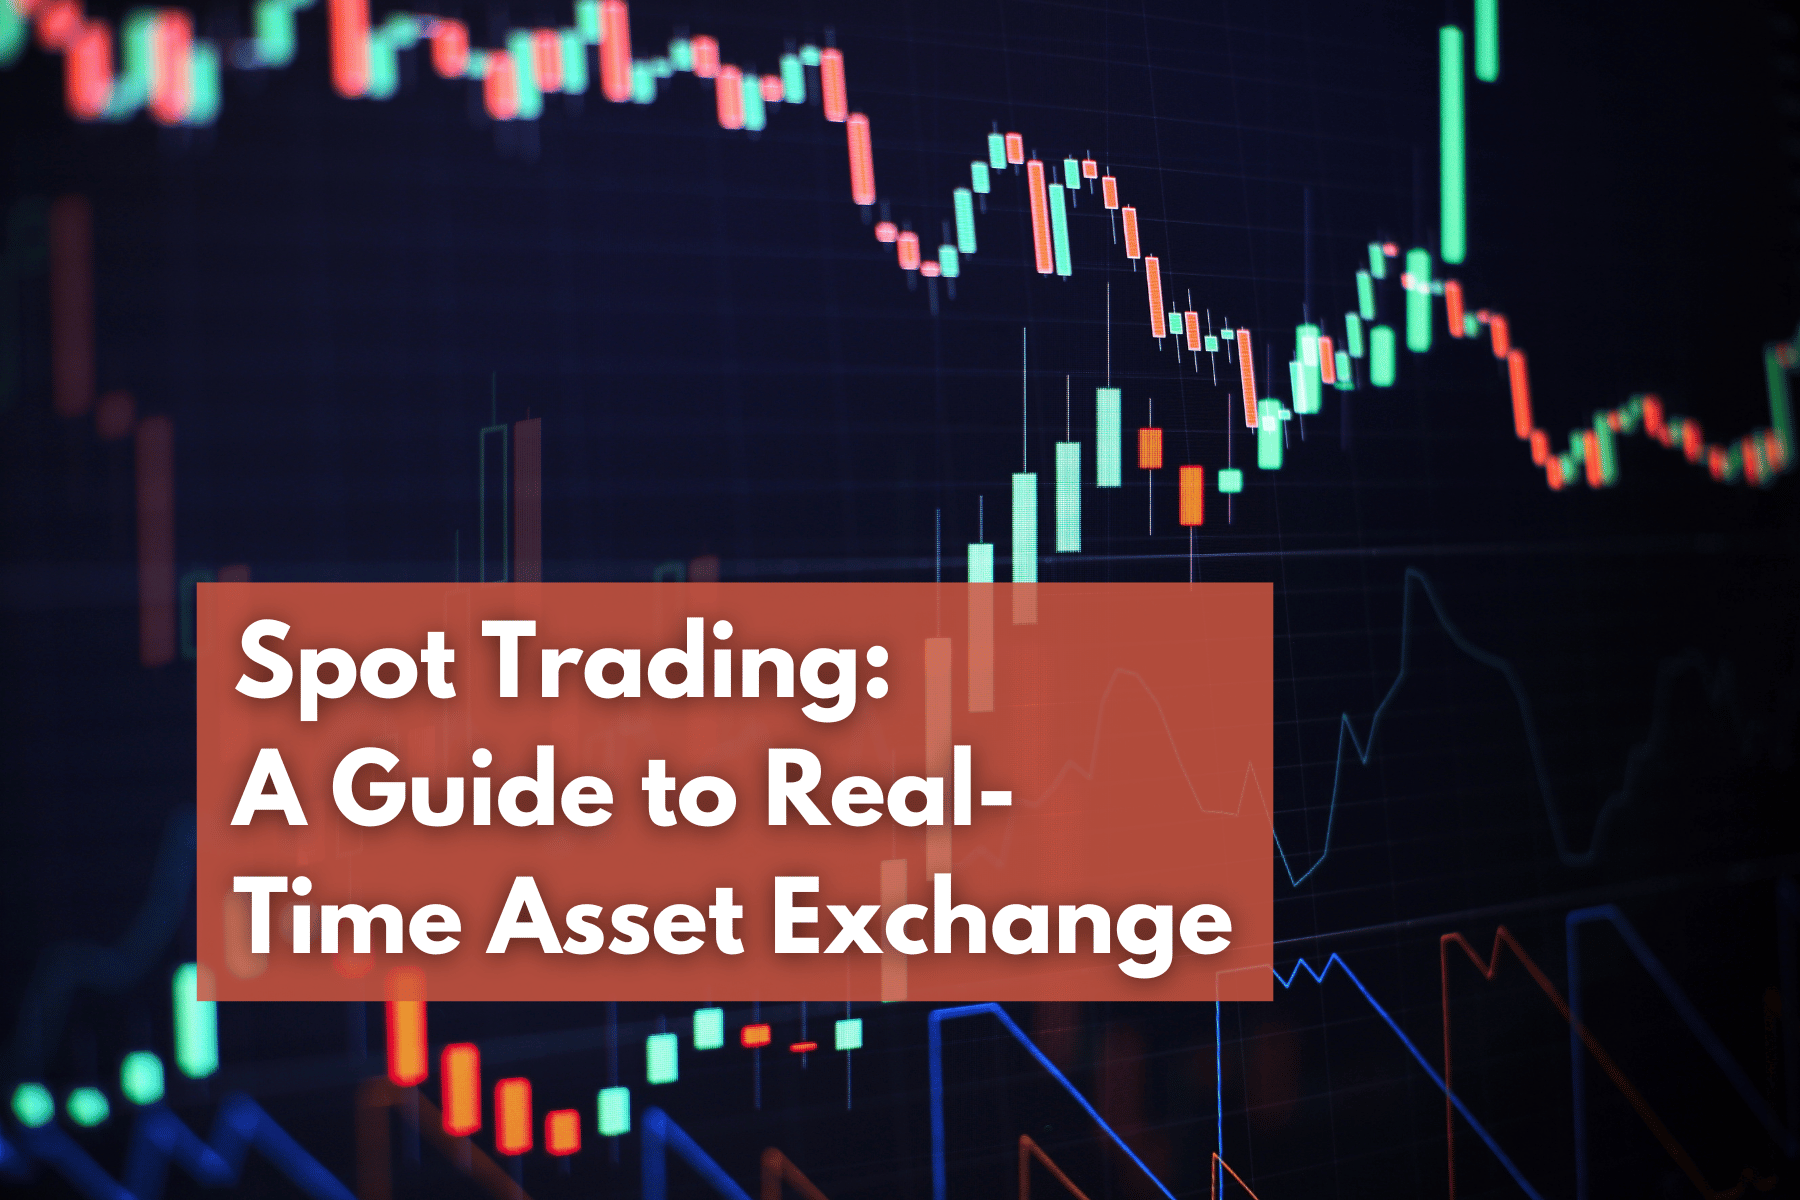 Spot Trading: A Guide to Real-Time Asset Exchange